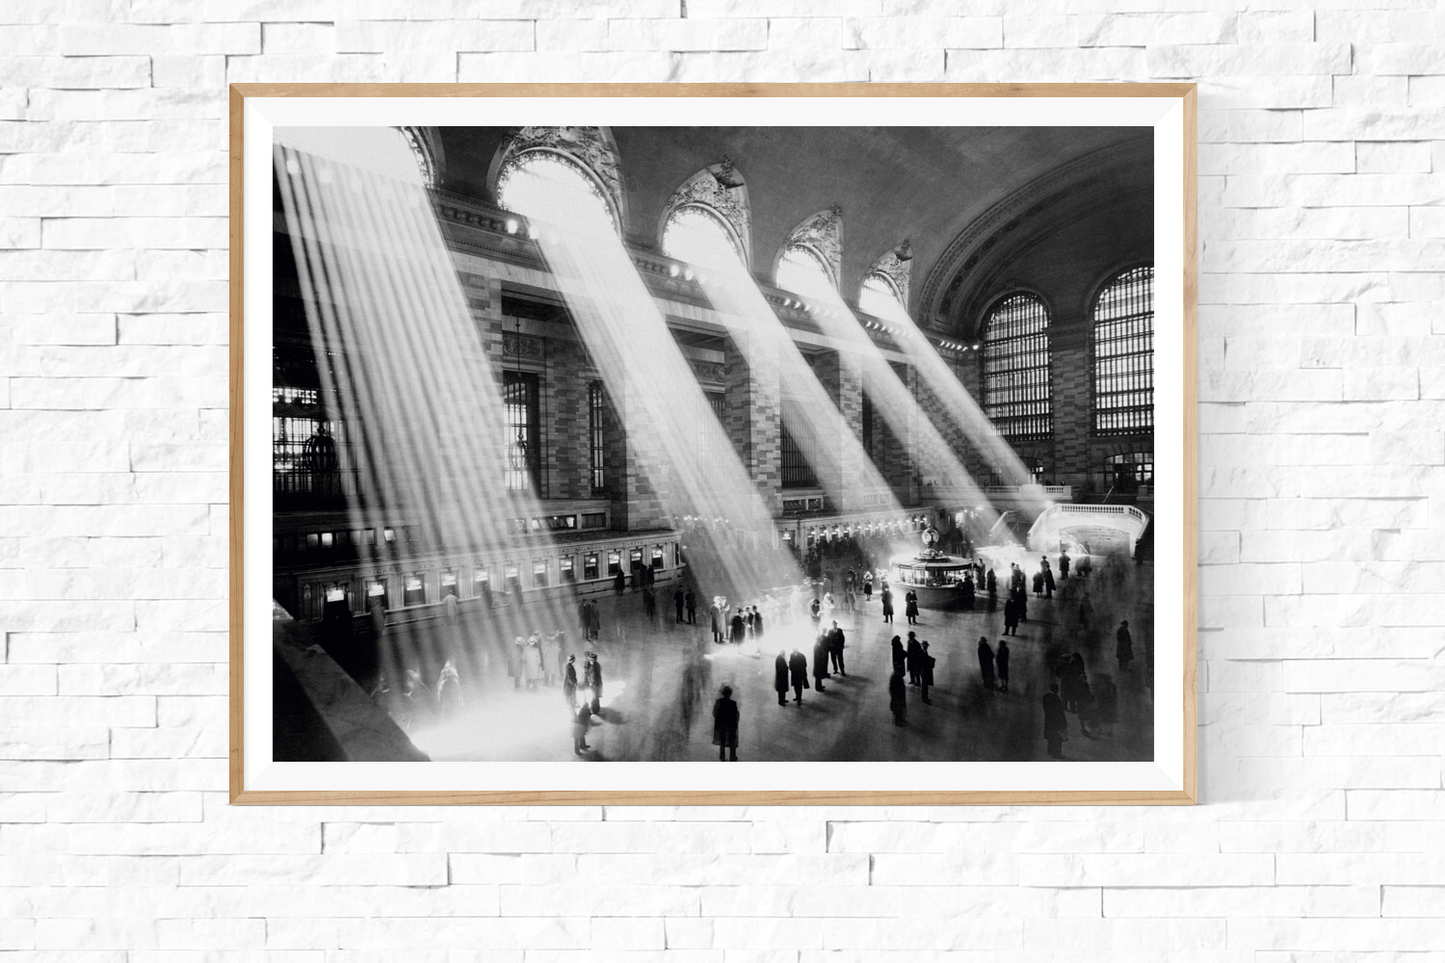 Sun Beams into Grand Central Station by Hal Morey